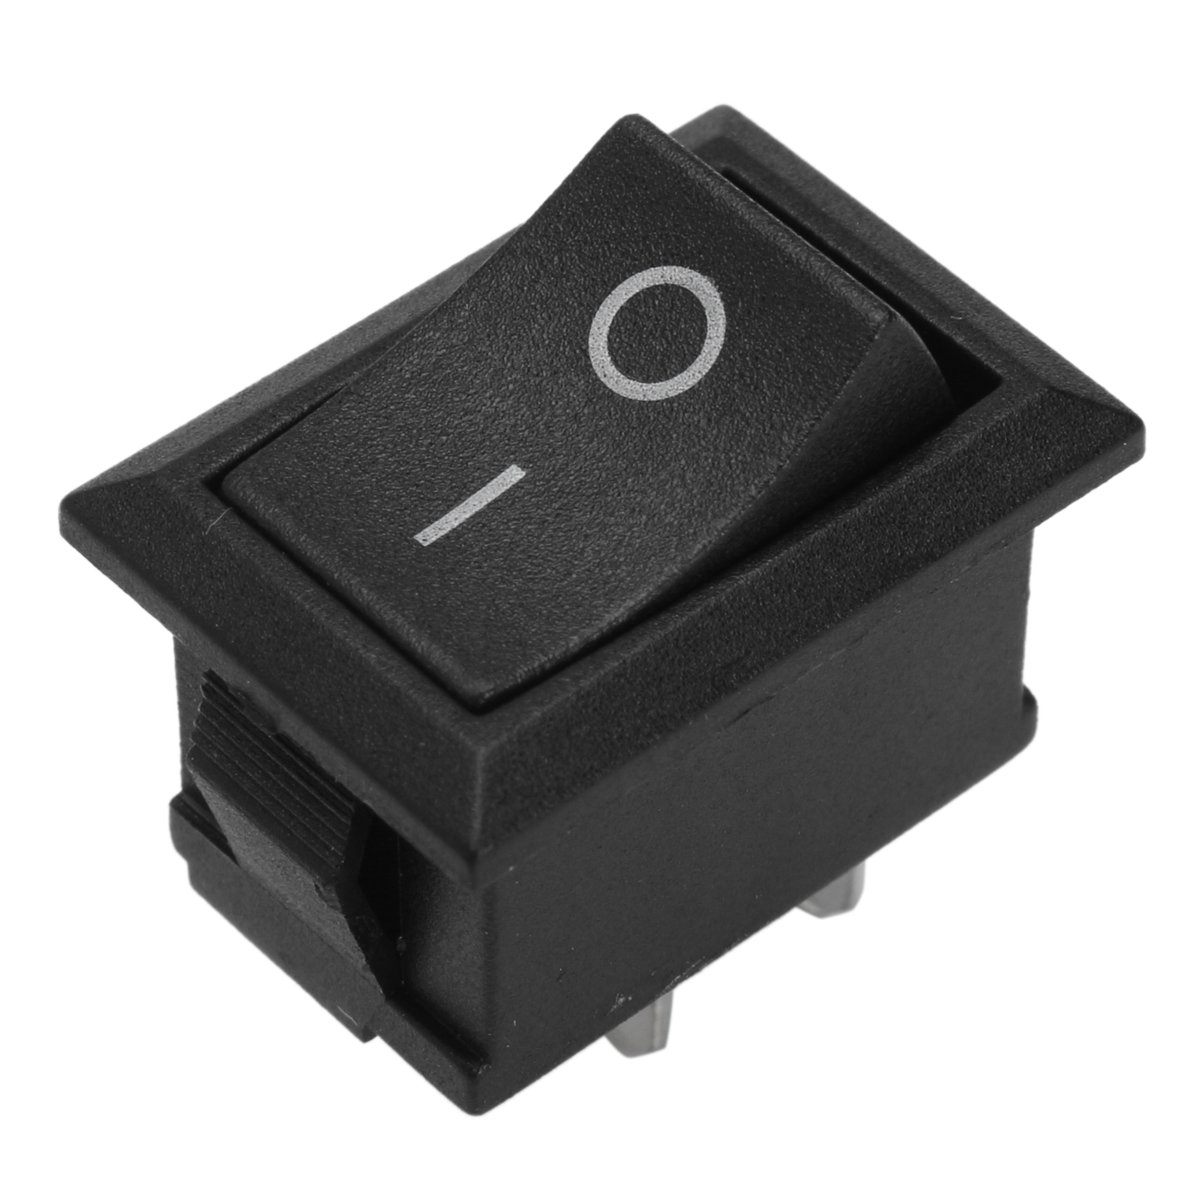 C-FUNN 2Pin 10A 250V T125/55 Plastic Rocker Switch Double Pole for Canal Mr-2 Series von C-FUNN